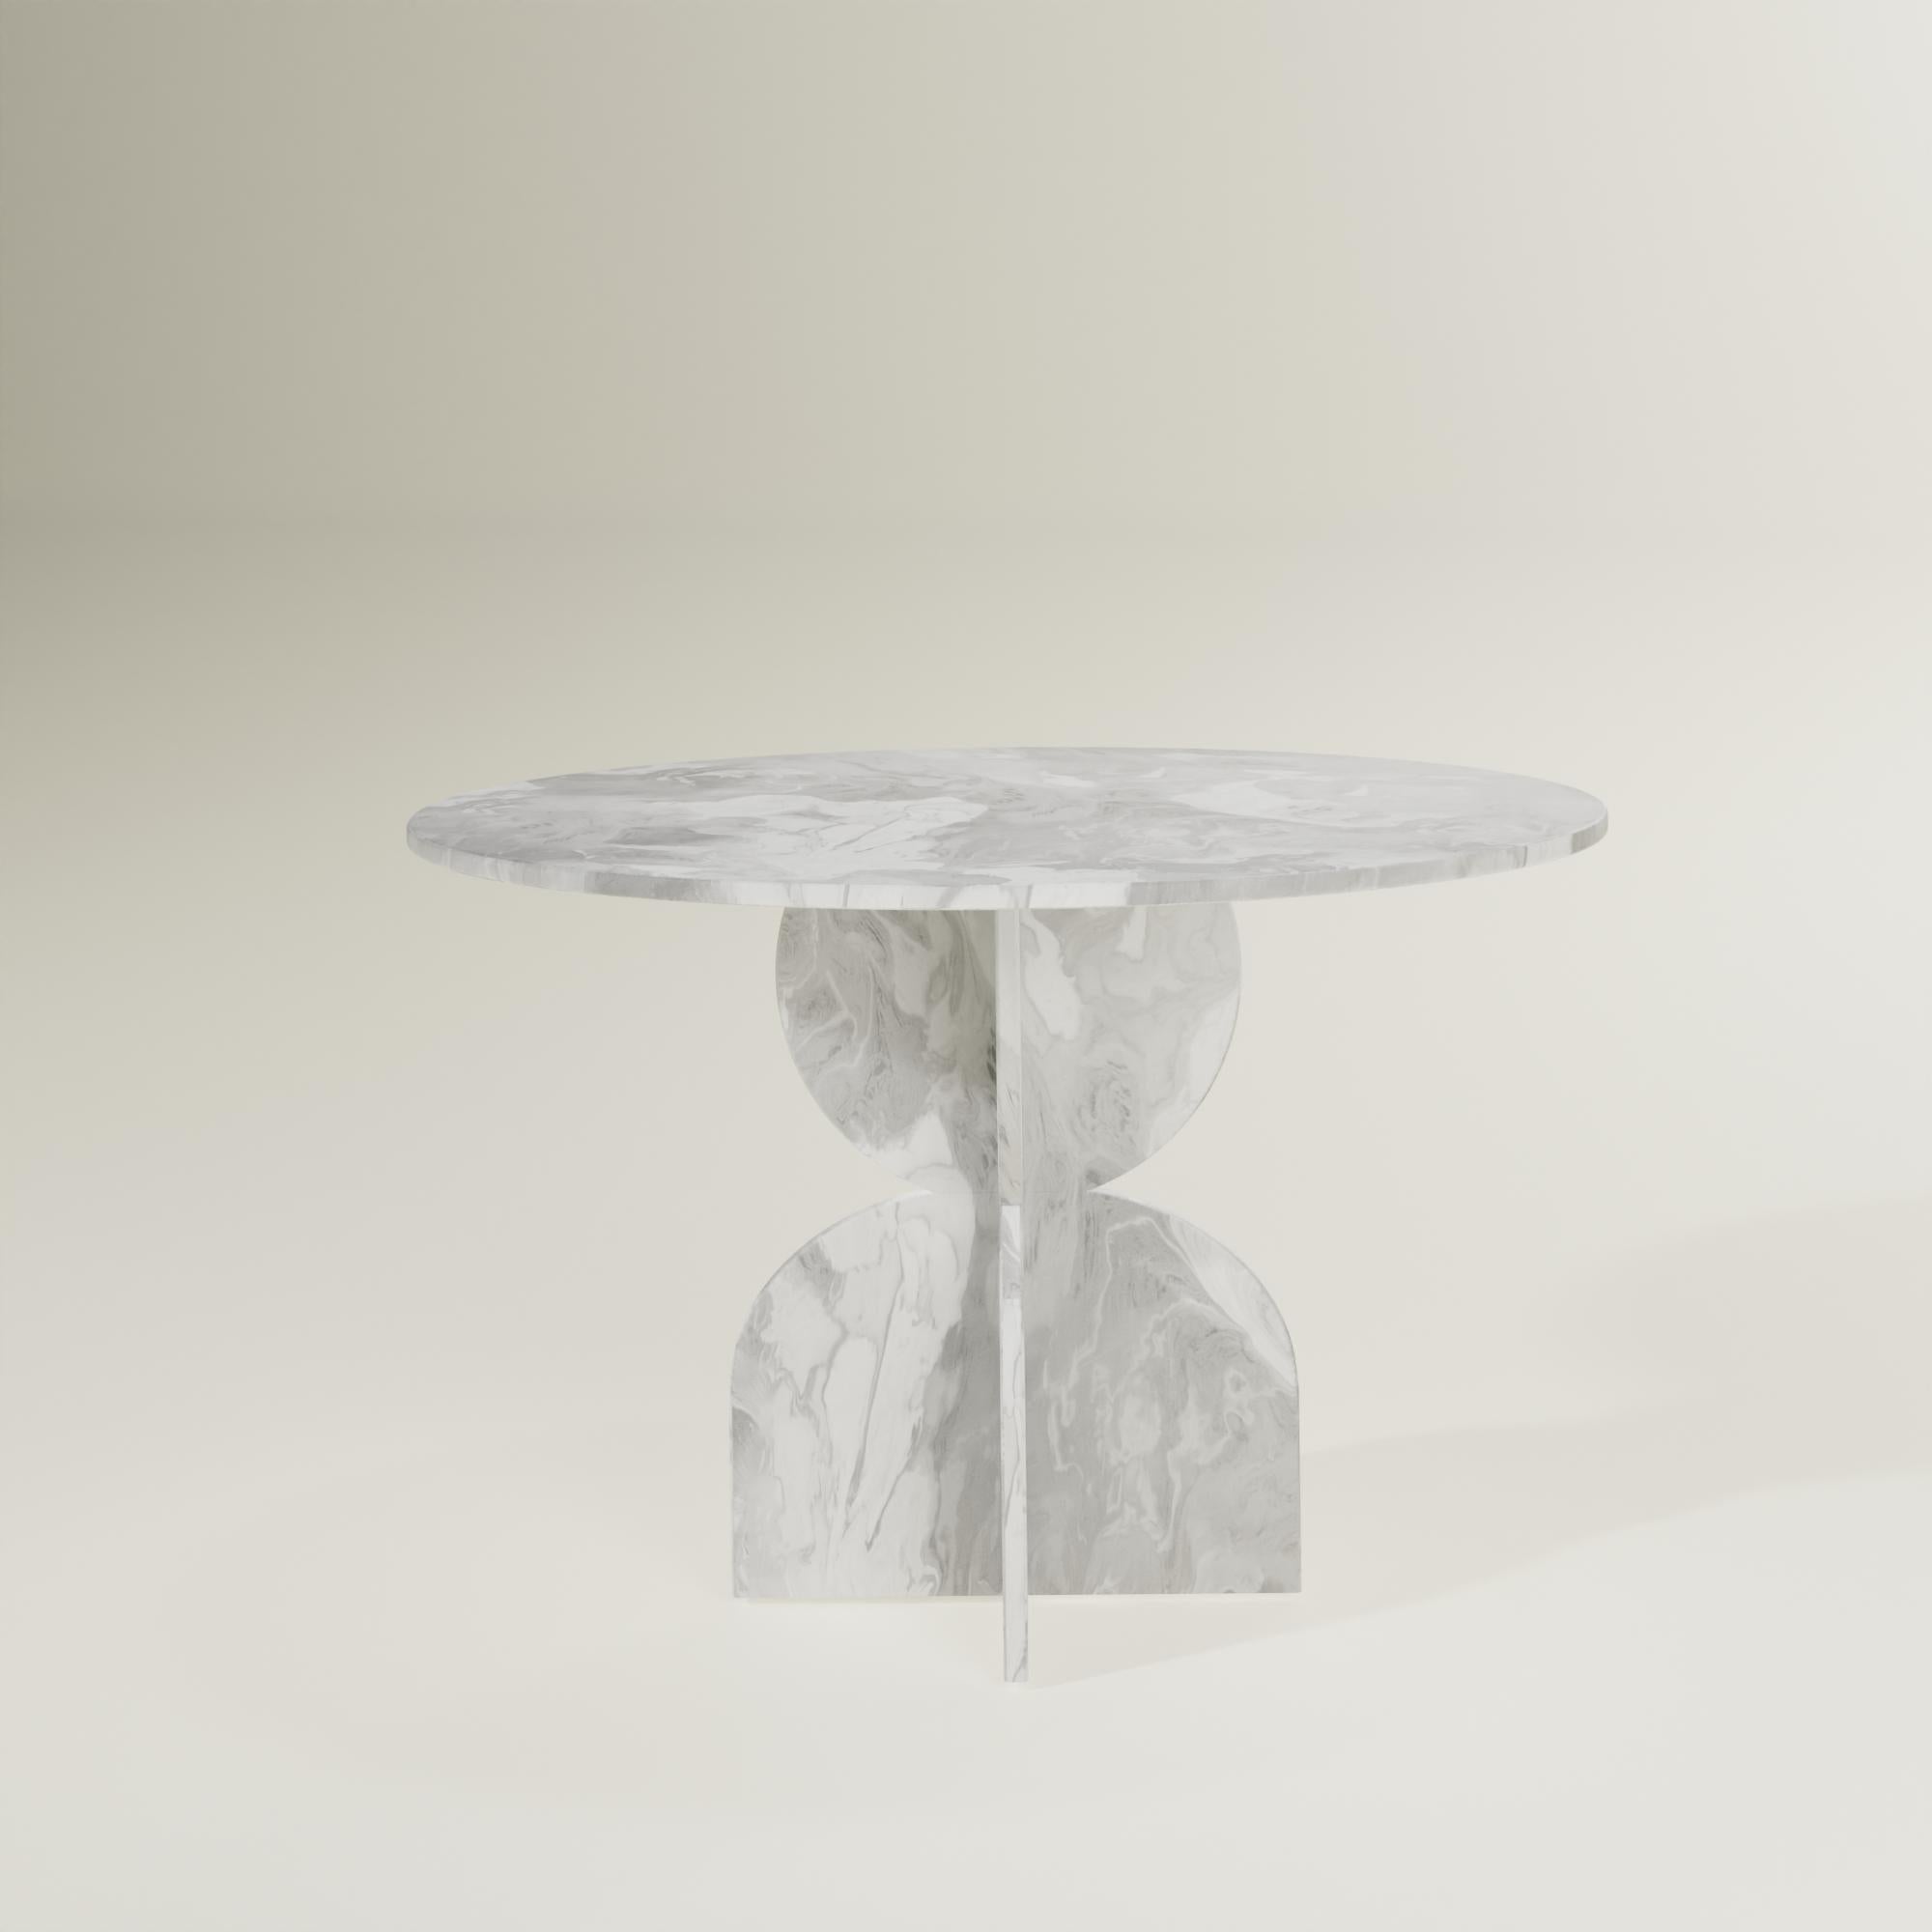 Dutch Contemporary White Round Table Handcrafted 100% Recycled Plastic by Anqa Studios For Sale